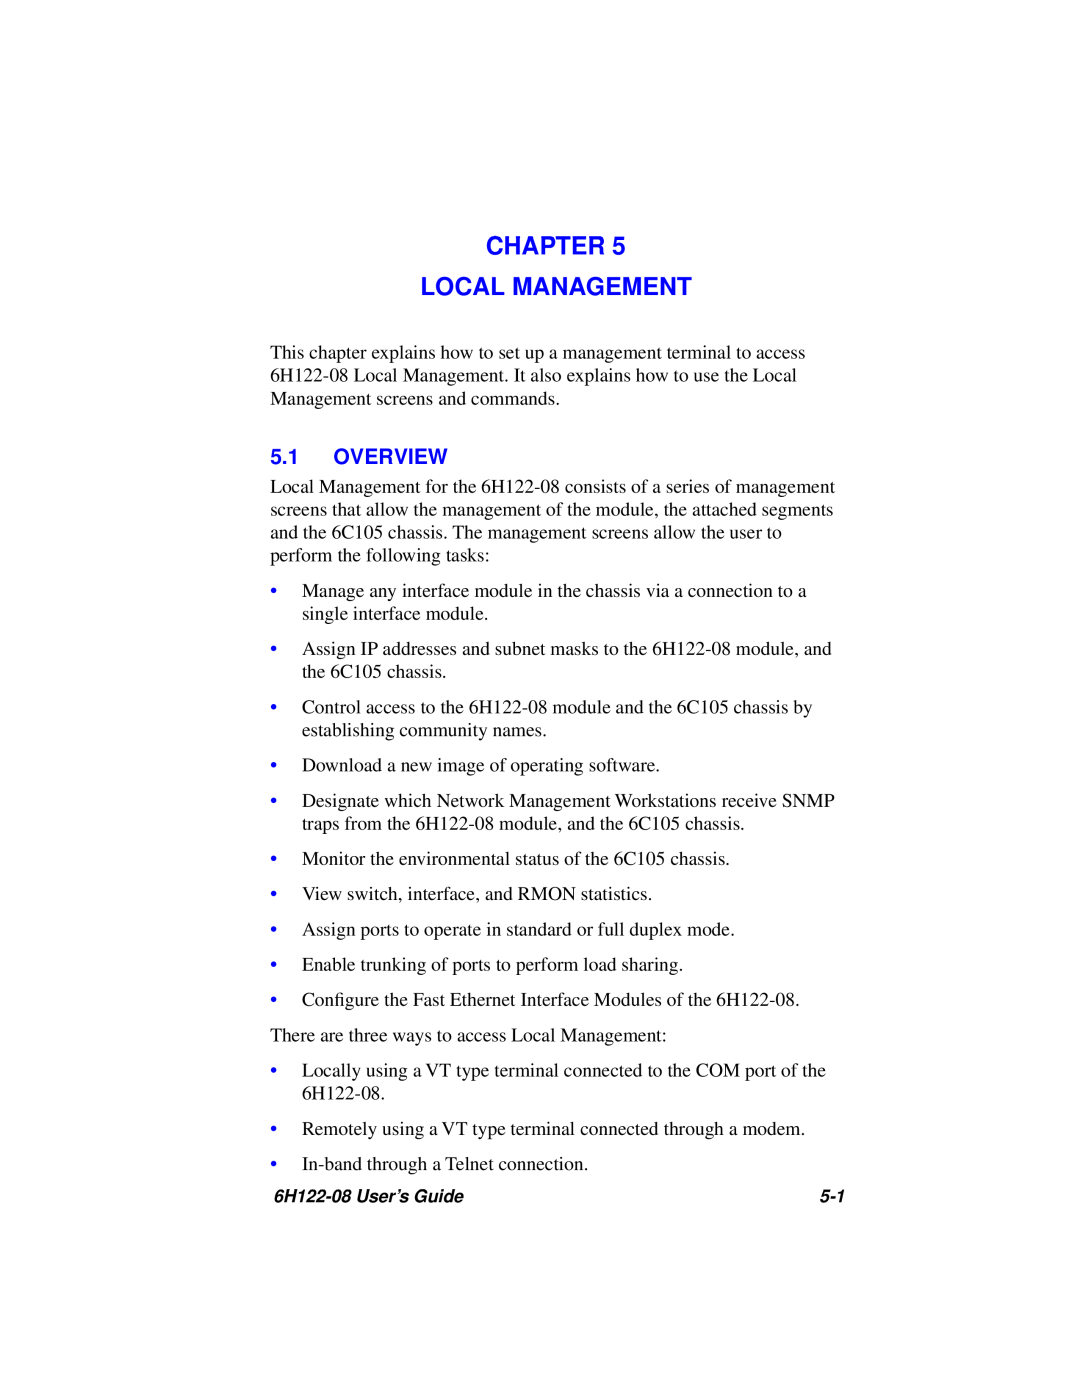 Cabletron Systems 6H122-08 manual Chapter Local Management, Overview 